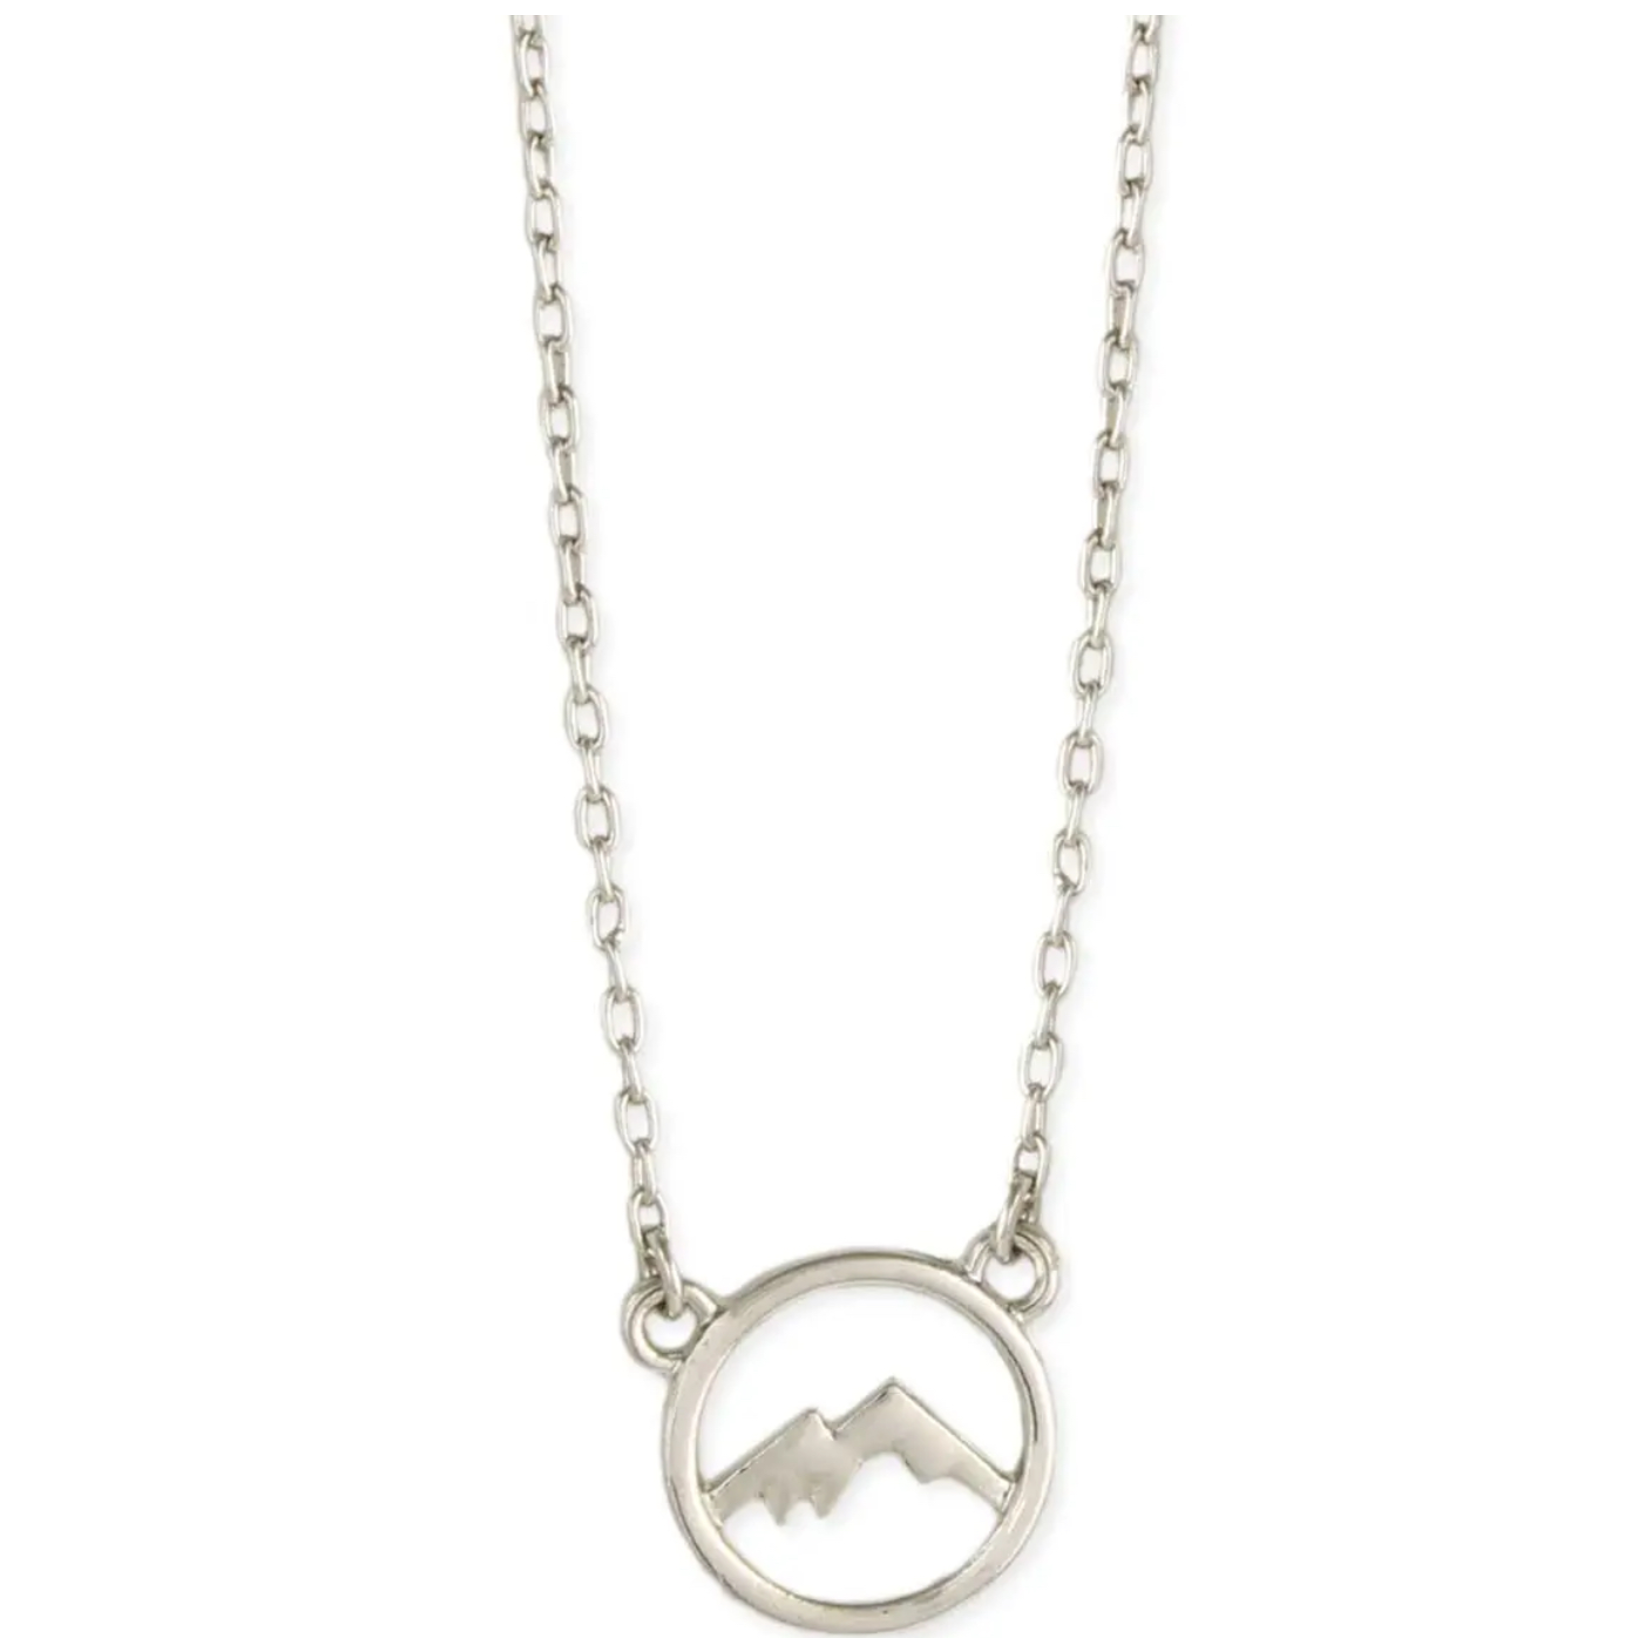 Buy Minimalist Snowy Mountain Necklace Hiking Mountain Peak Pendants  Necklaces Jewelry Climbing Nature Outdoor Lovers Gifts-Silver at Amazon.in